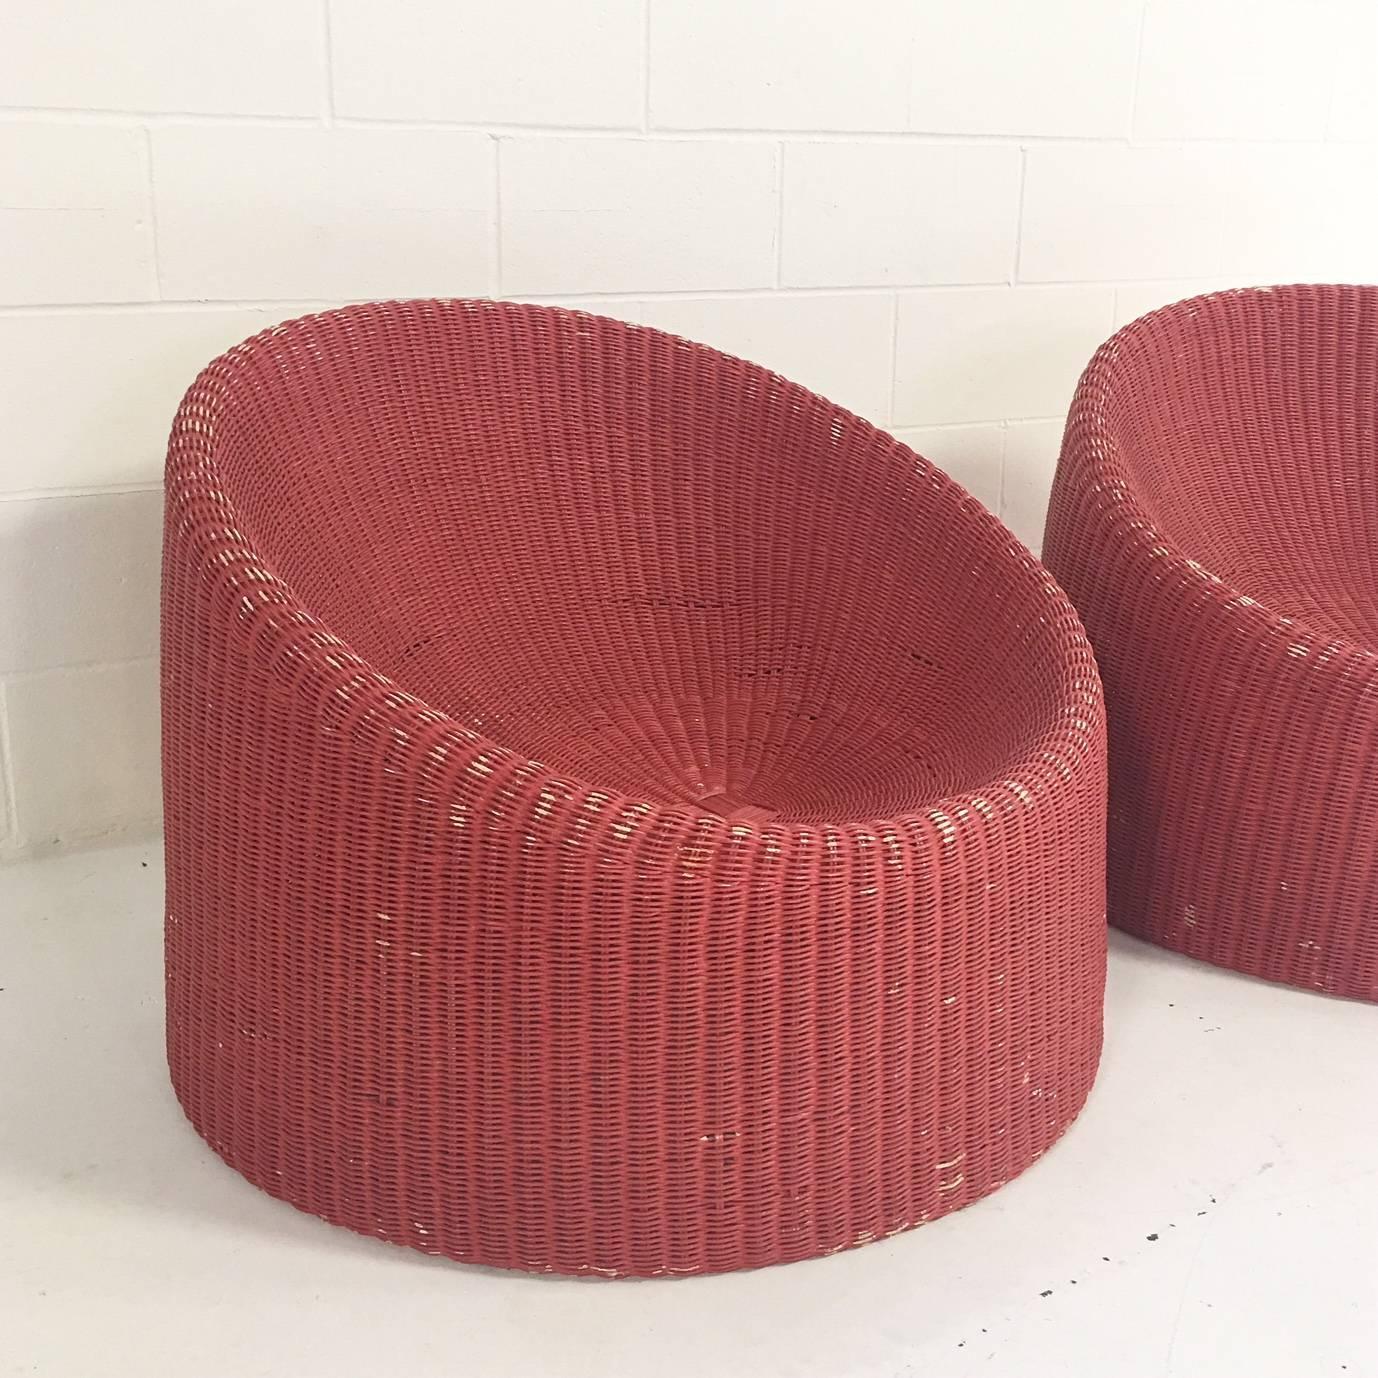 Pair of Eero Aarnio for Stendig Woven Rattan Lounge Chairs with Sheepskin Throws 2